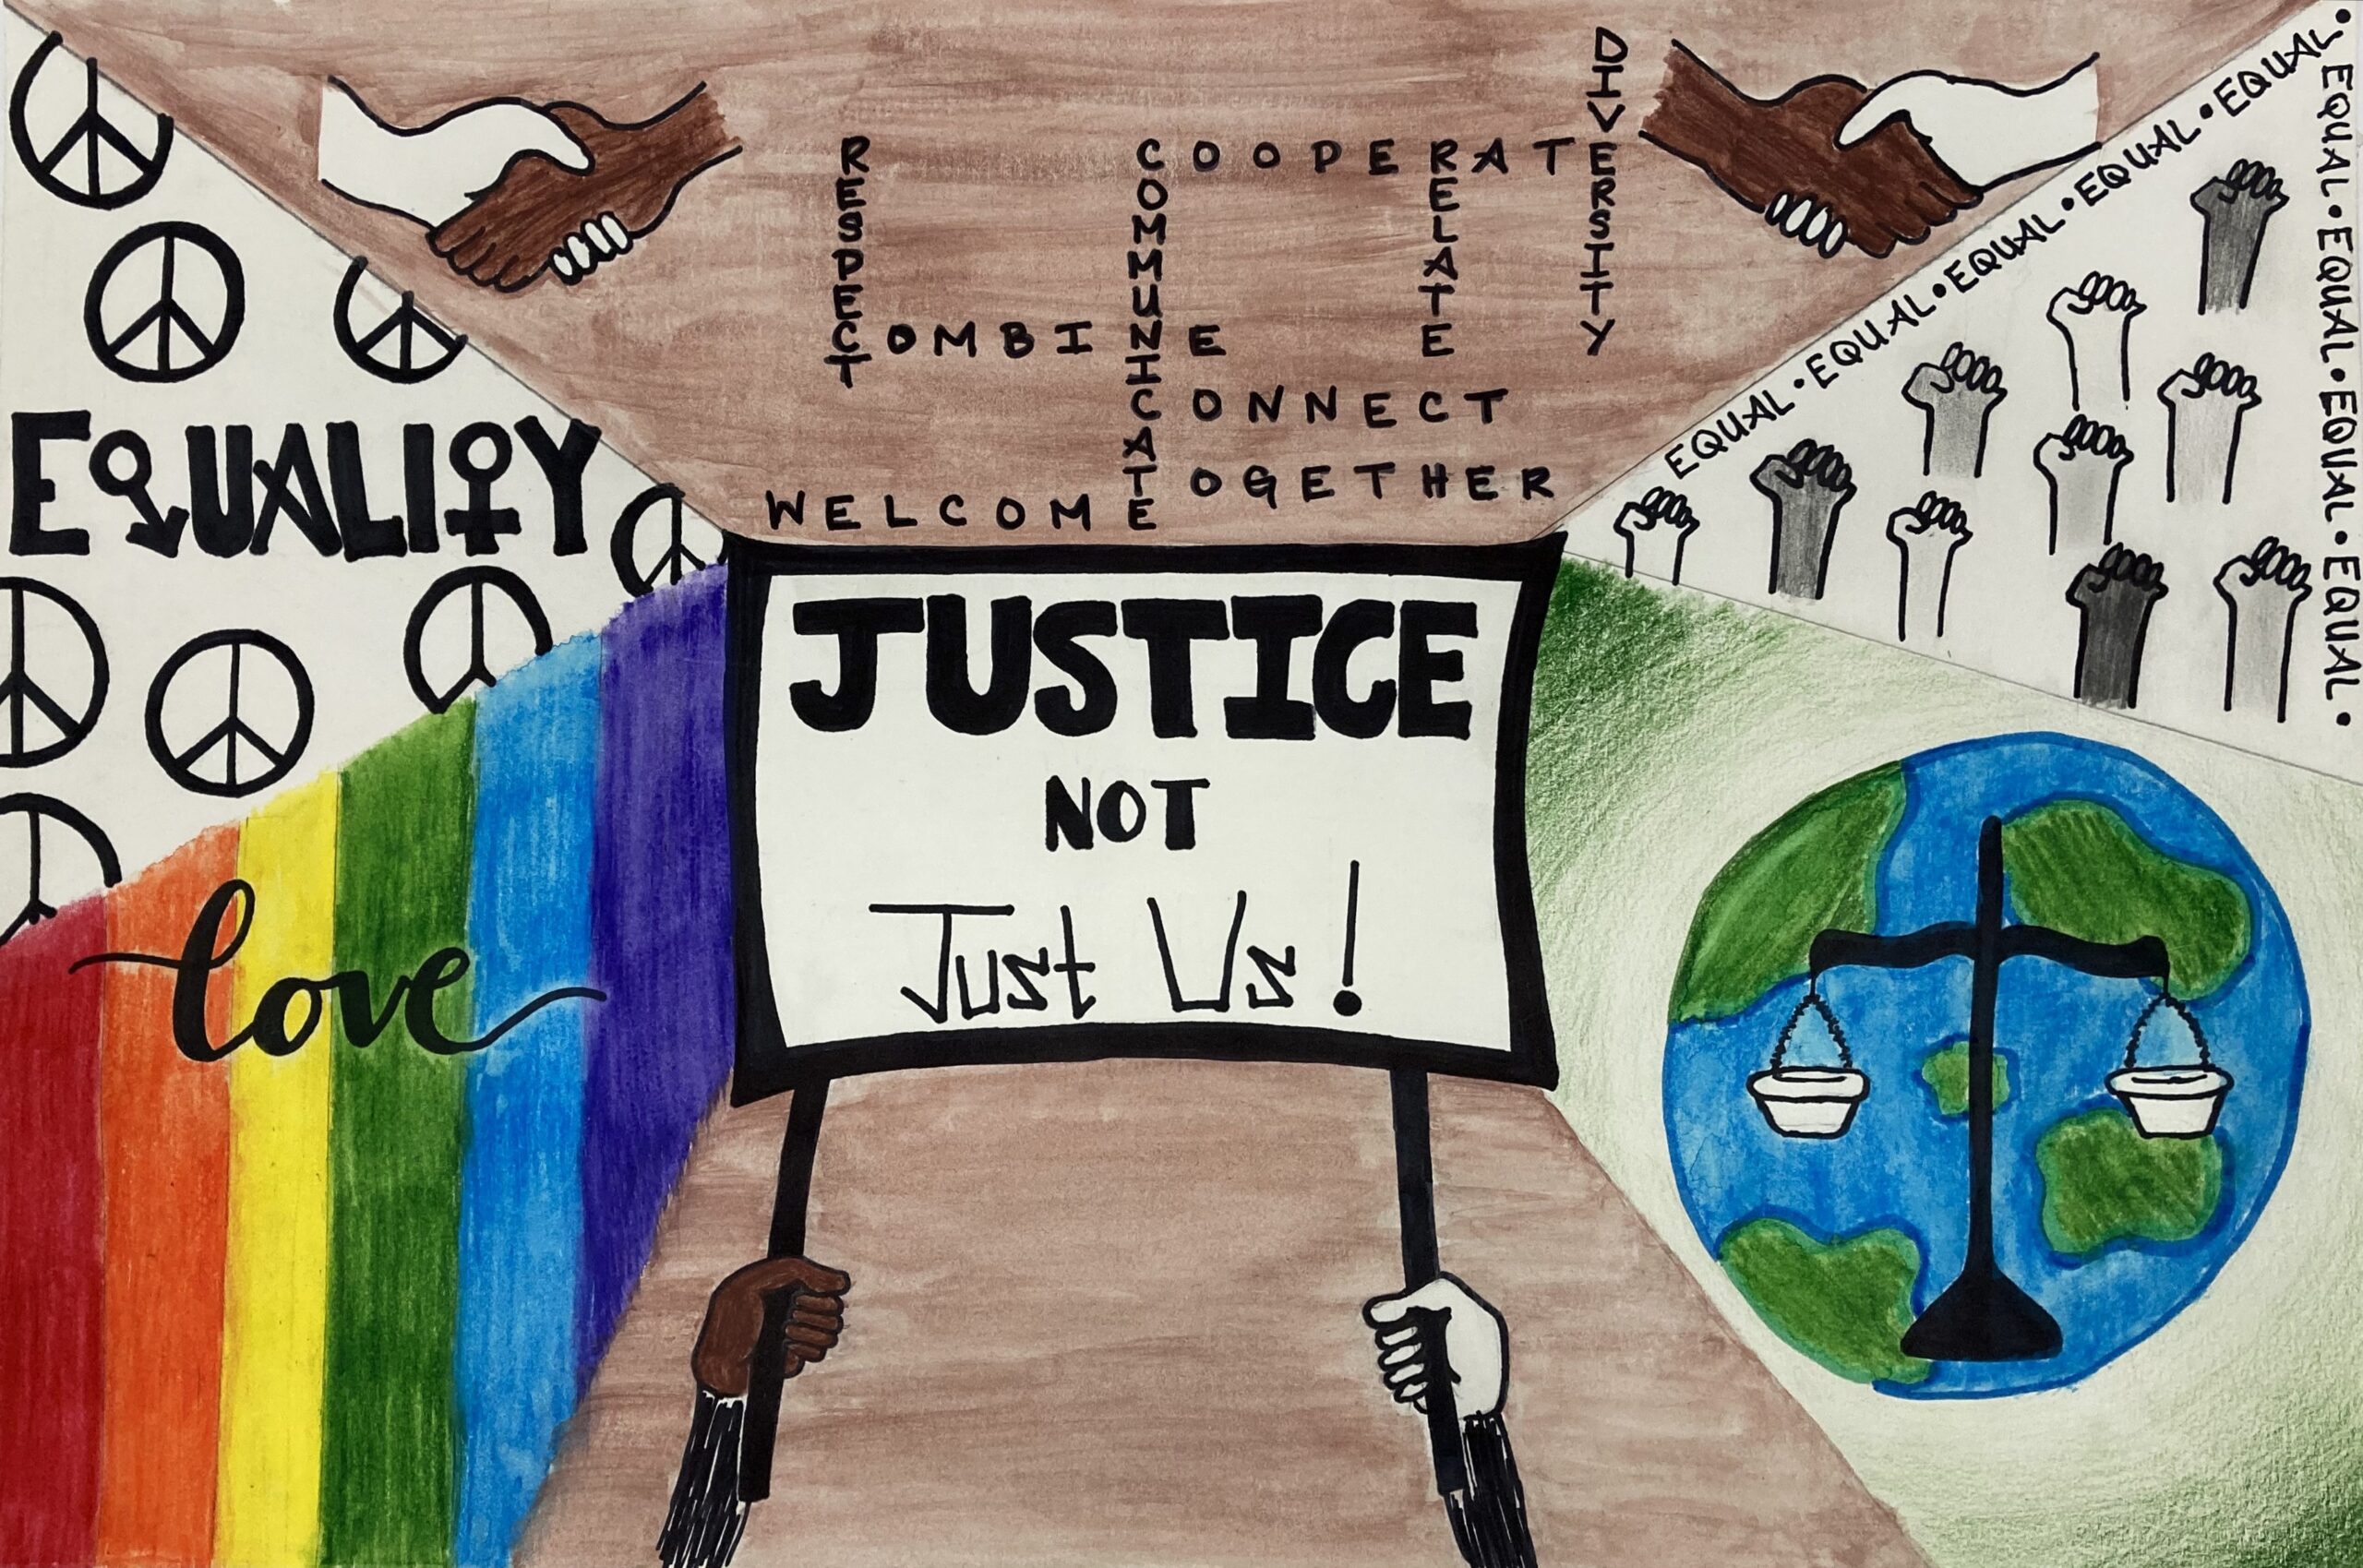 collage of images showing signs and symbols for equal justice